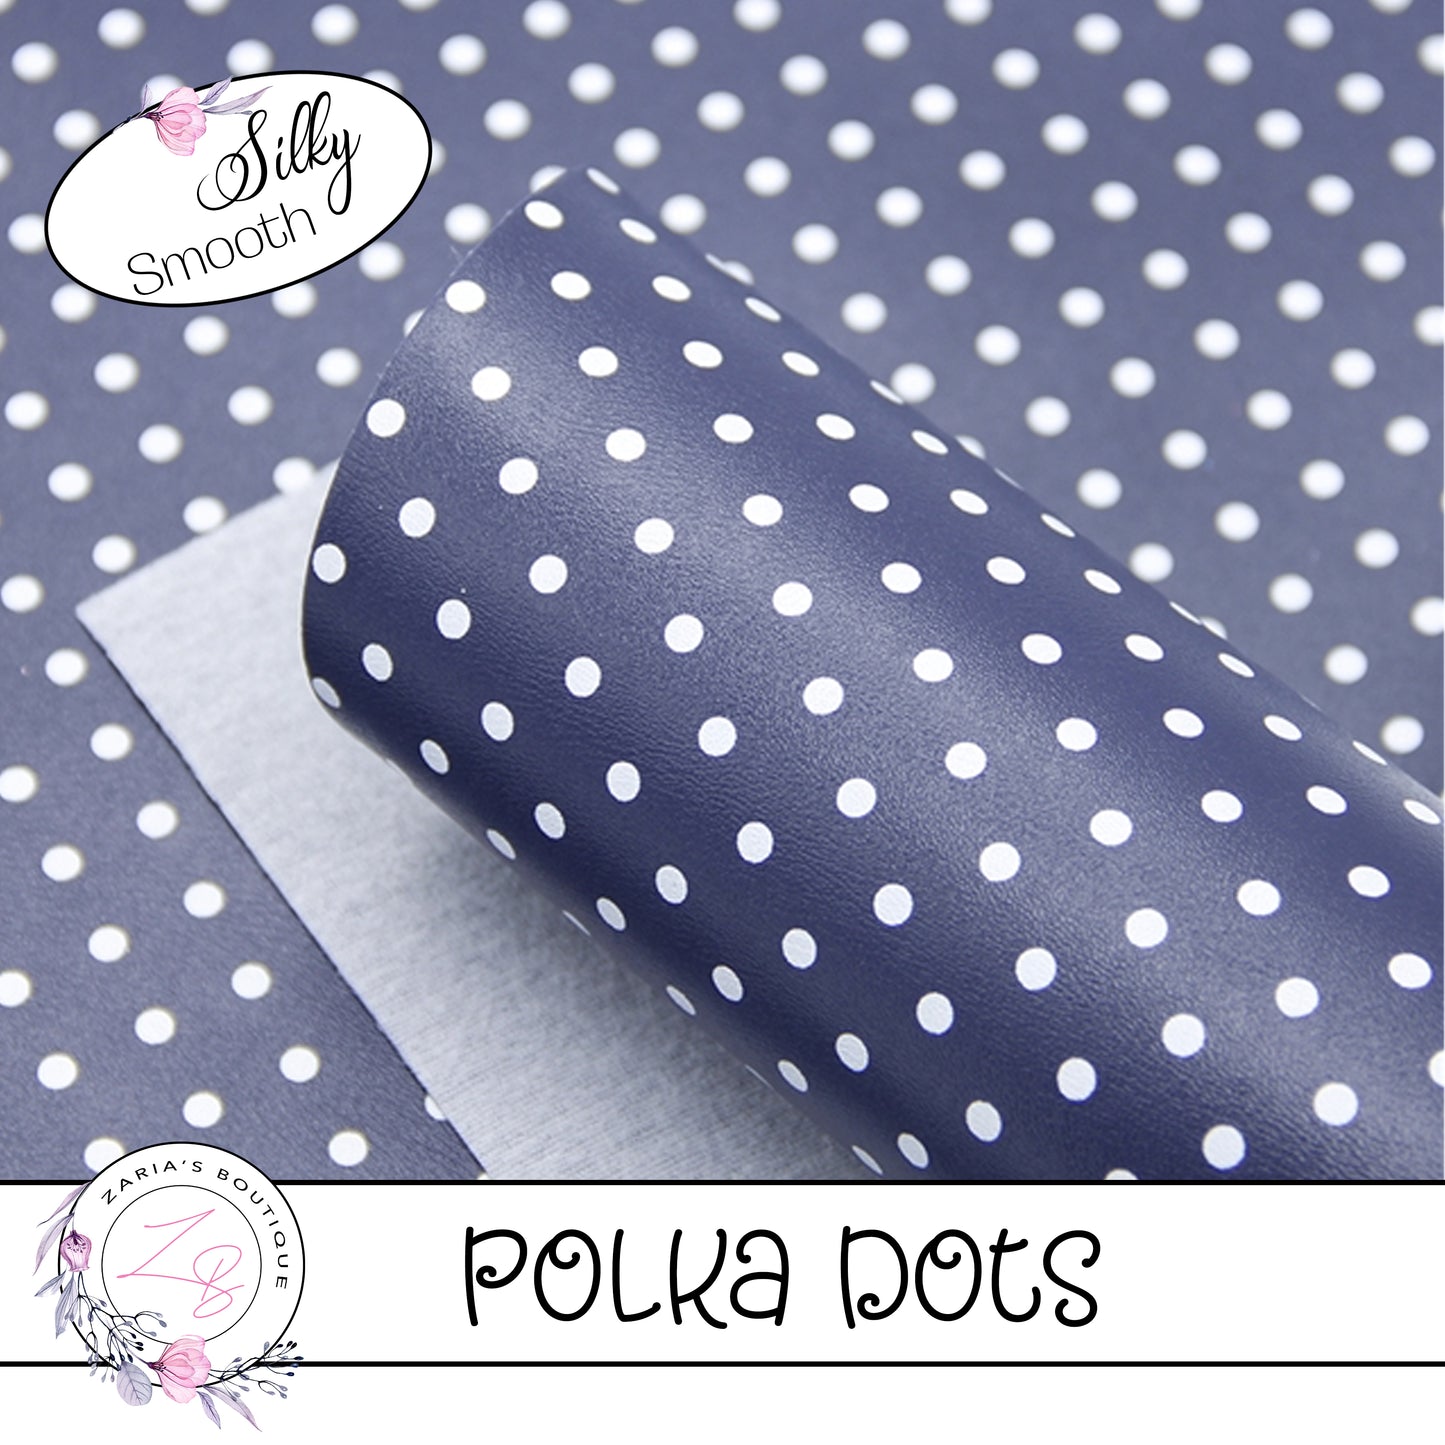 ⋅ Navy Blue & White Polka Dots ⋅ Smooth Vegan Faux Leather